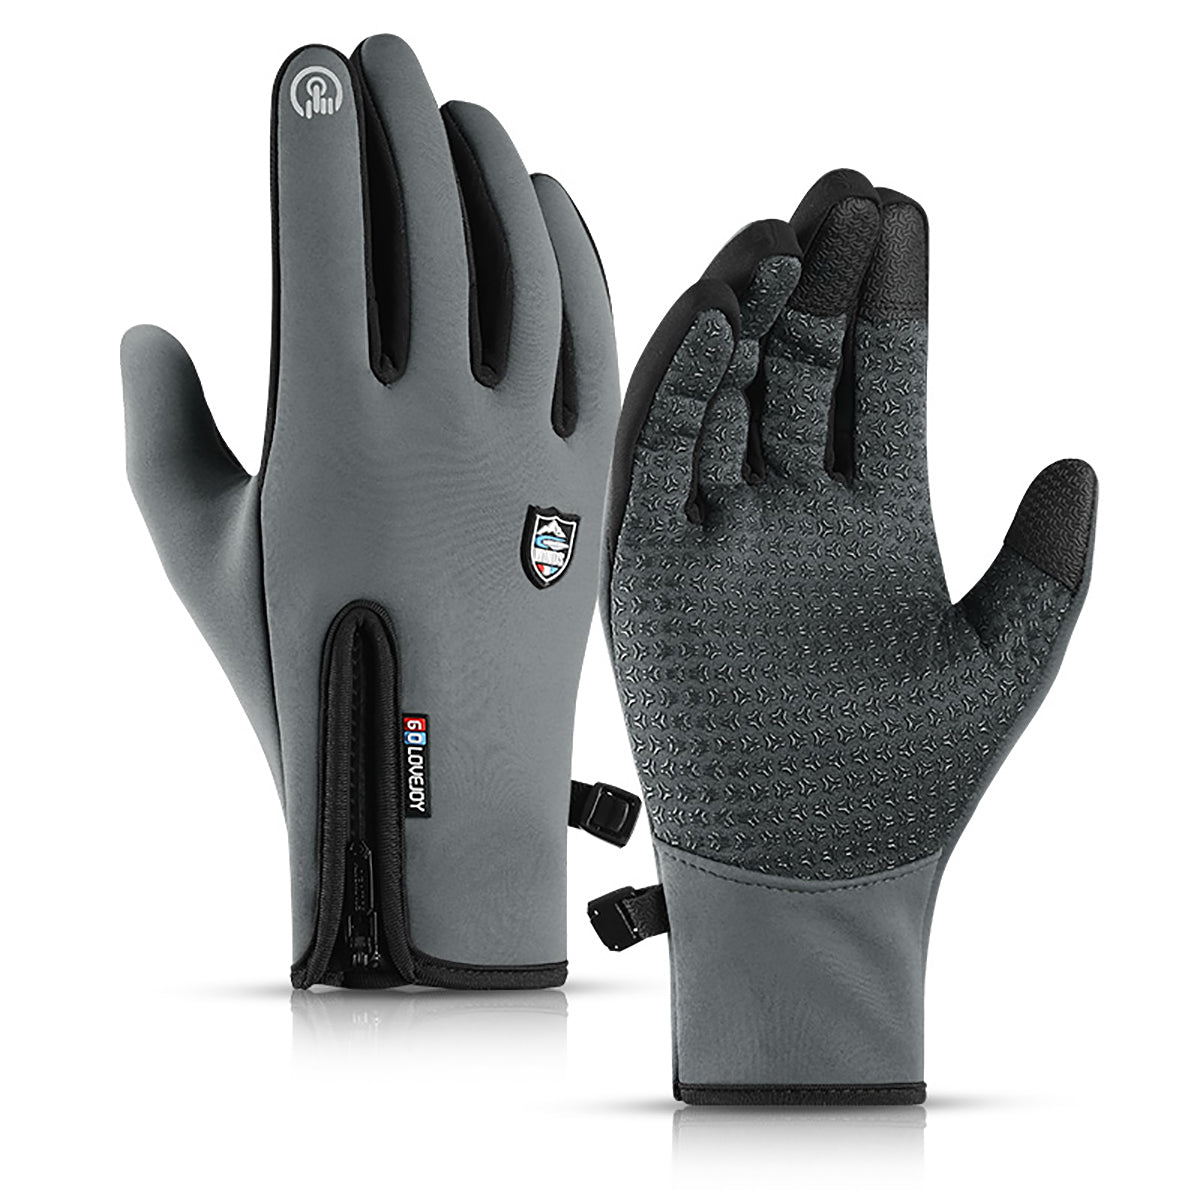 Slate Gray Winter Skiing Gloves Touch Screen Sport Outdoor Snowboarding Windproof Thermal